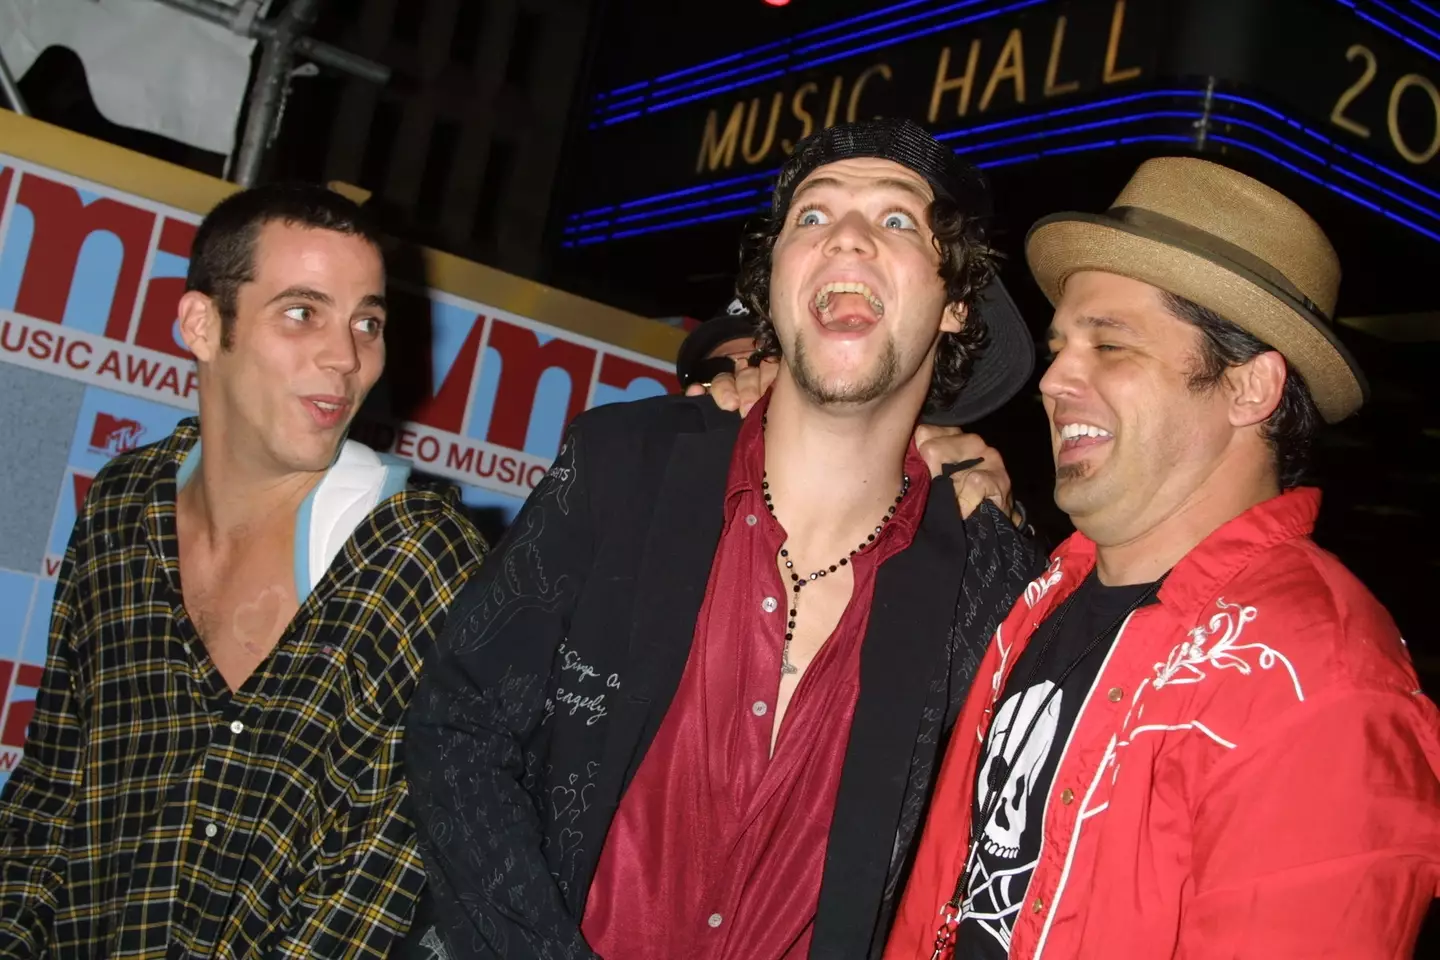 Steve-O, Bam Margera, and Johnny Knoxville back in the Jackass days.